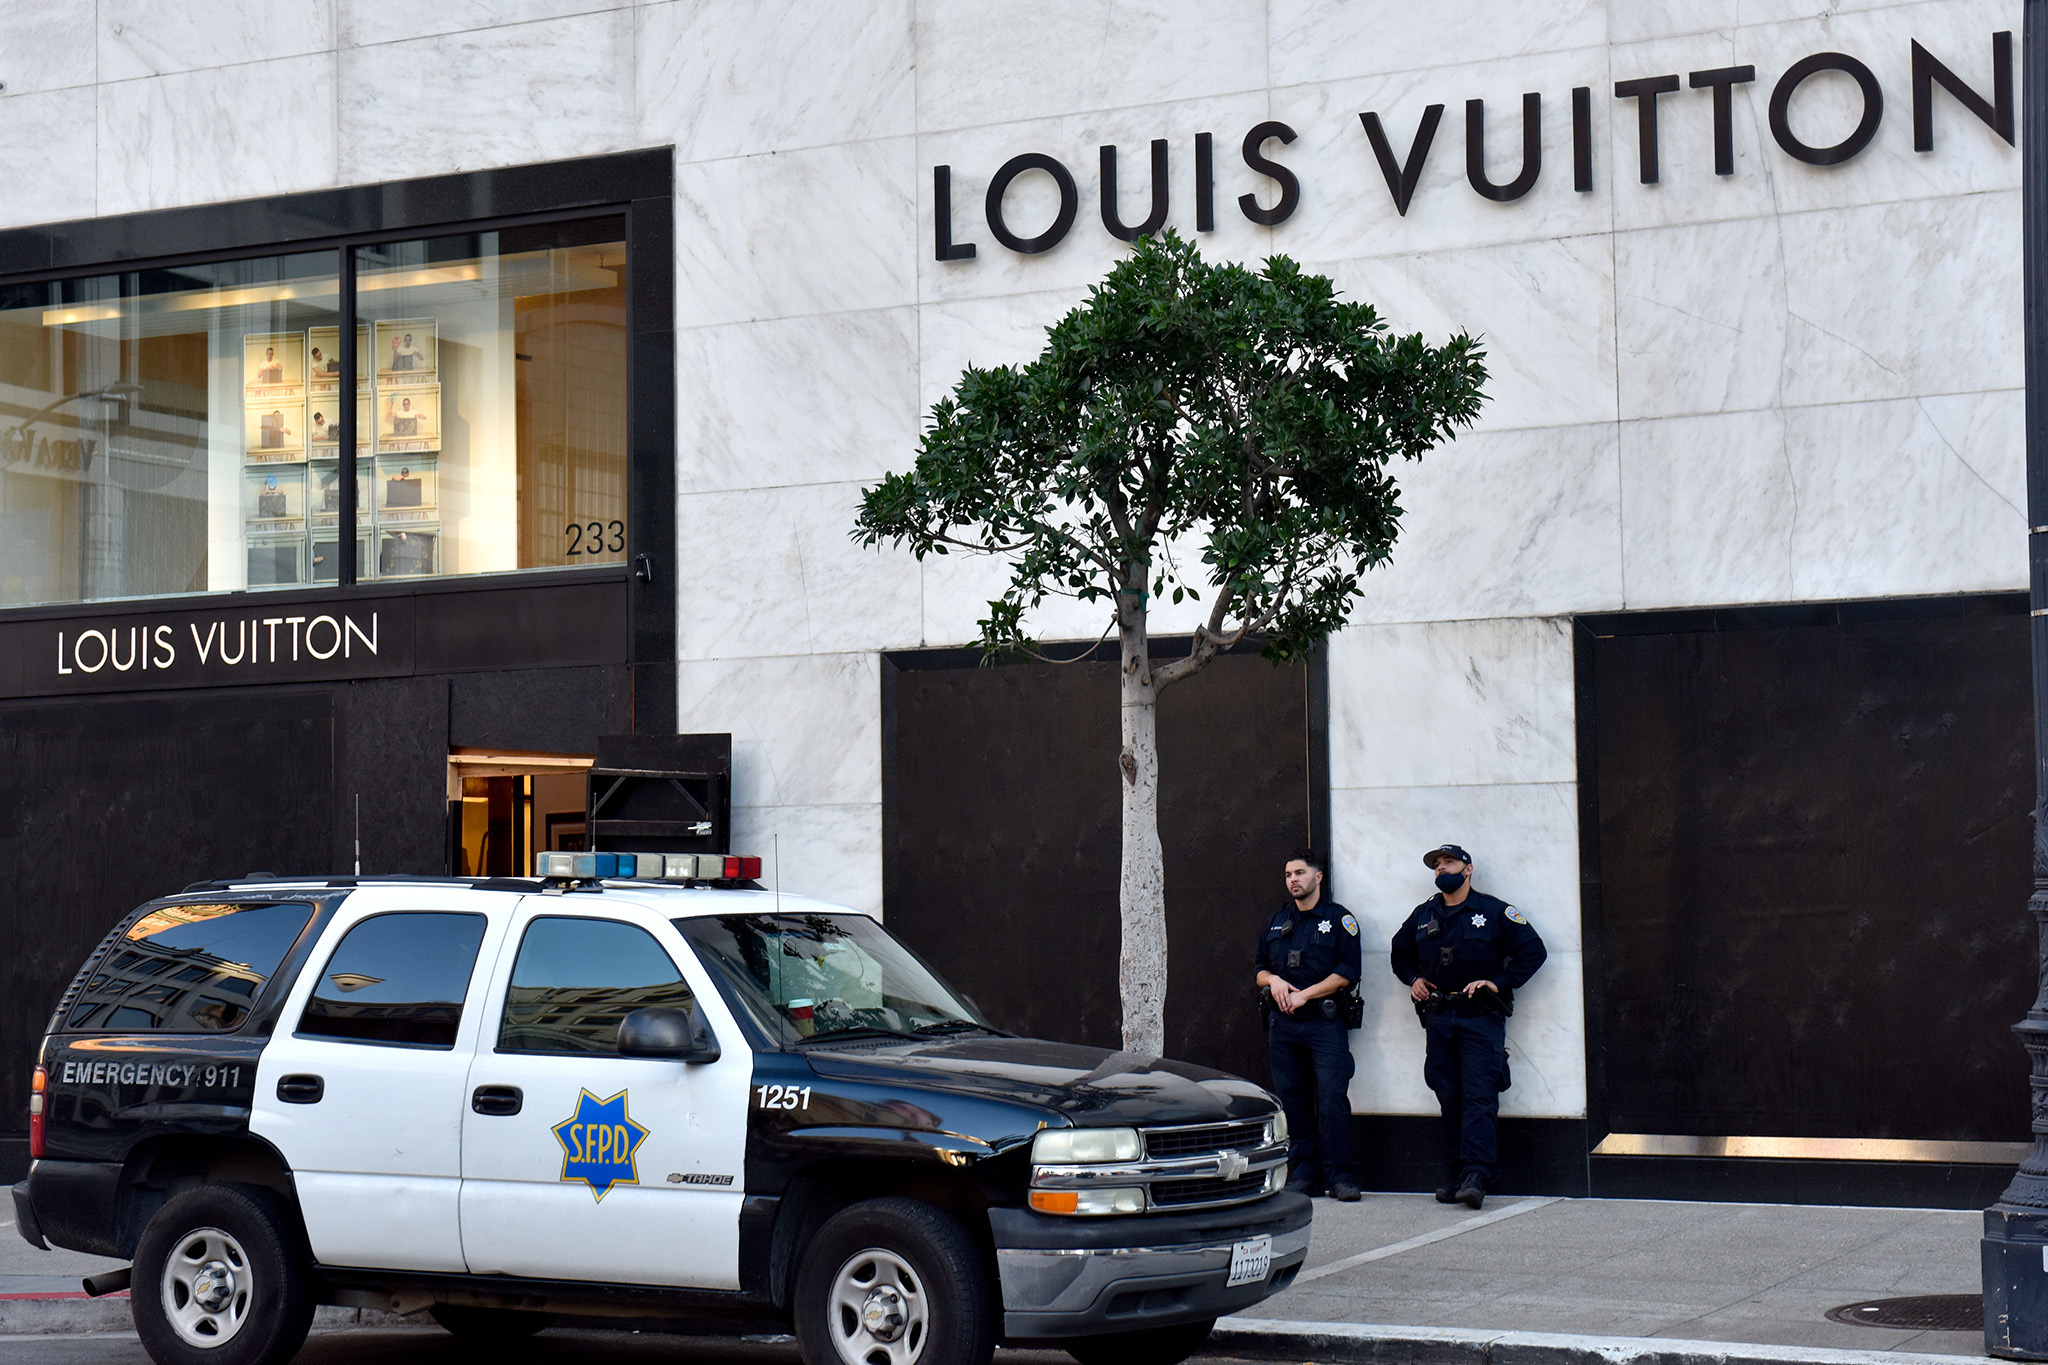 Video shows San Francisco's Union Square Louis Vuitton store after it was  'emptied out' by thieves 